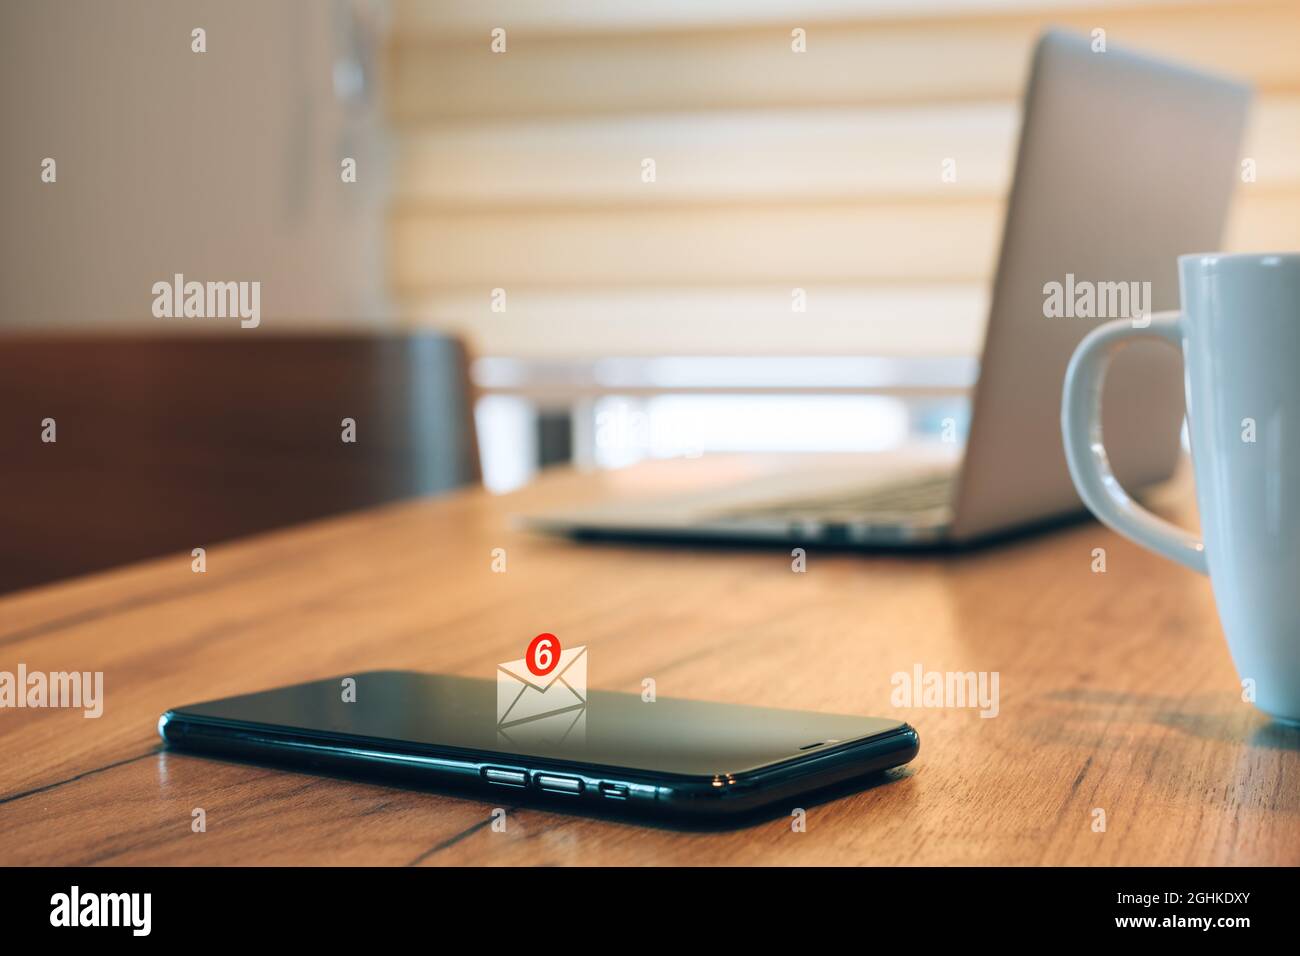 E-mail message notification pops up on mobile smart phone in home office, selective focus Stock Photo